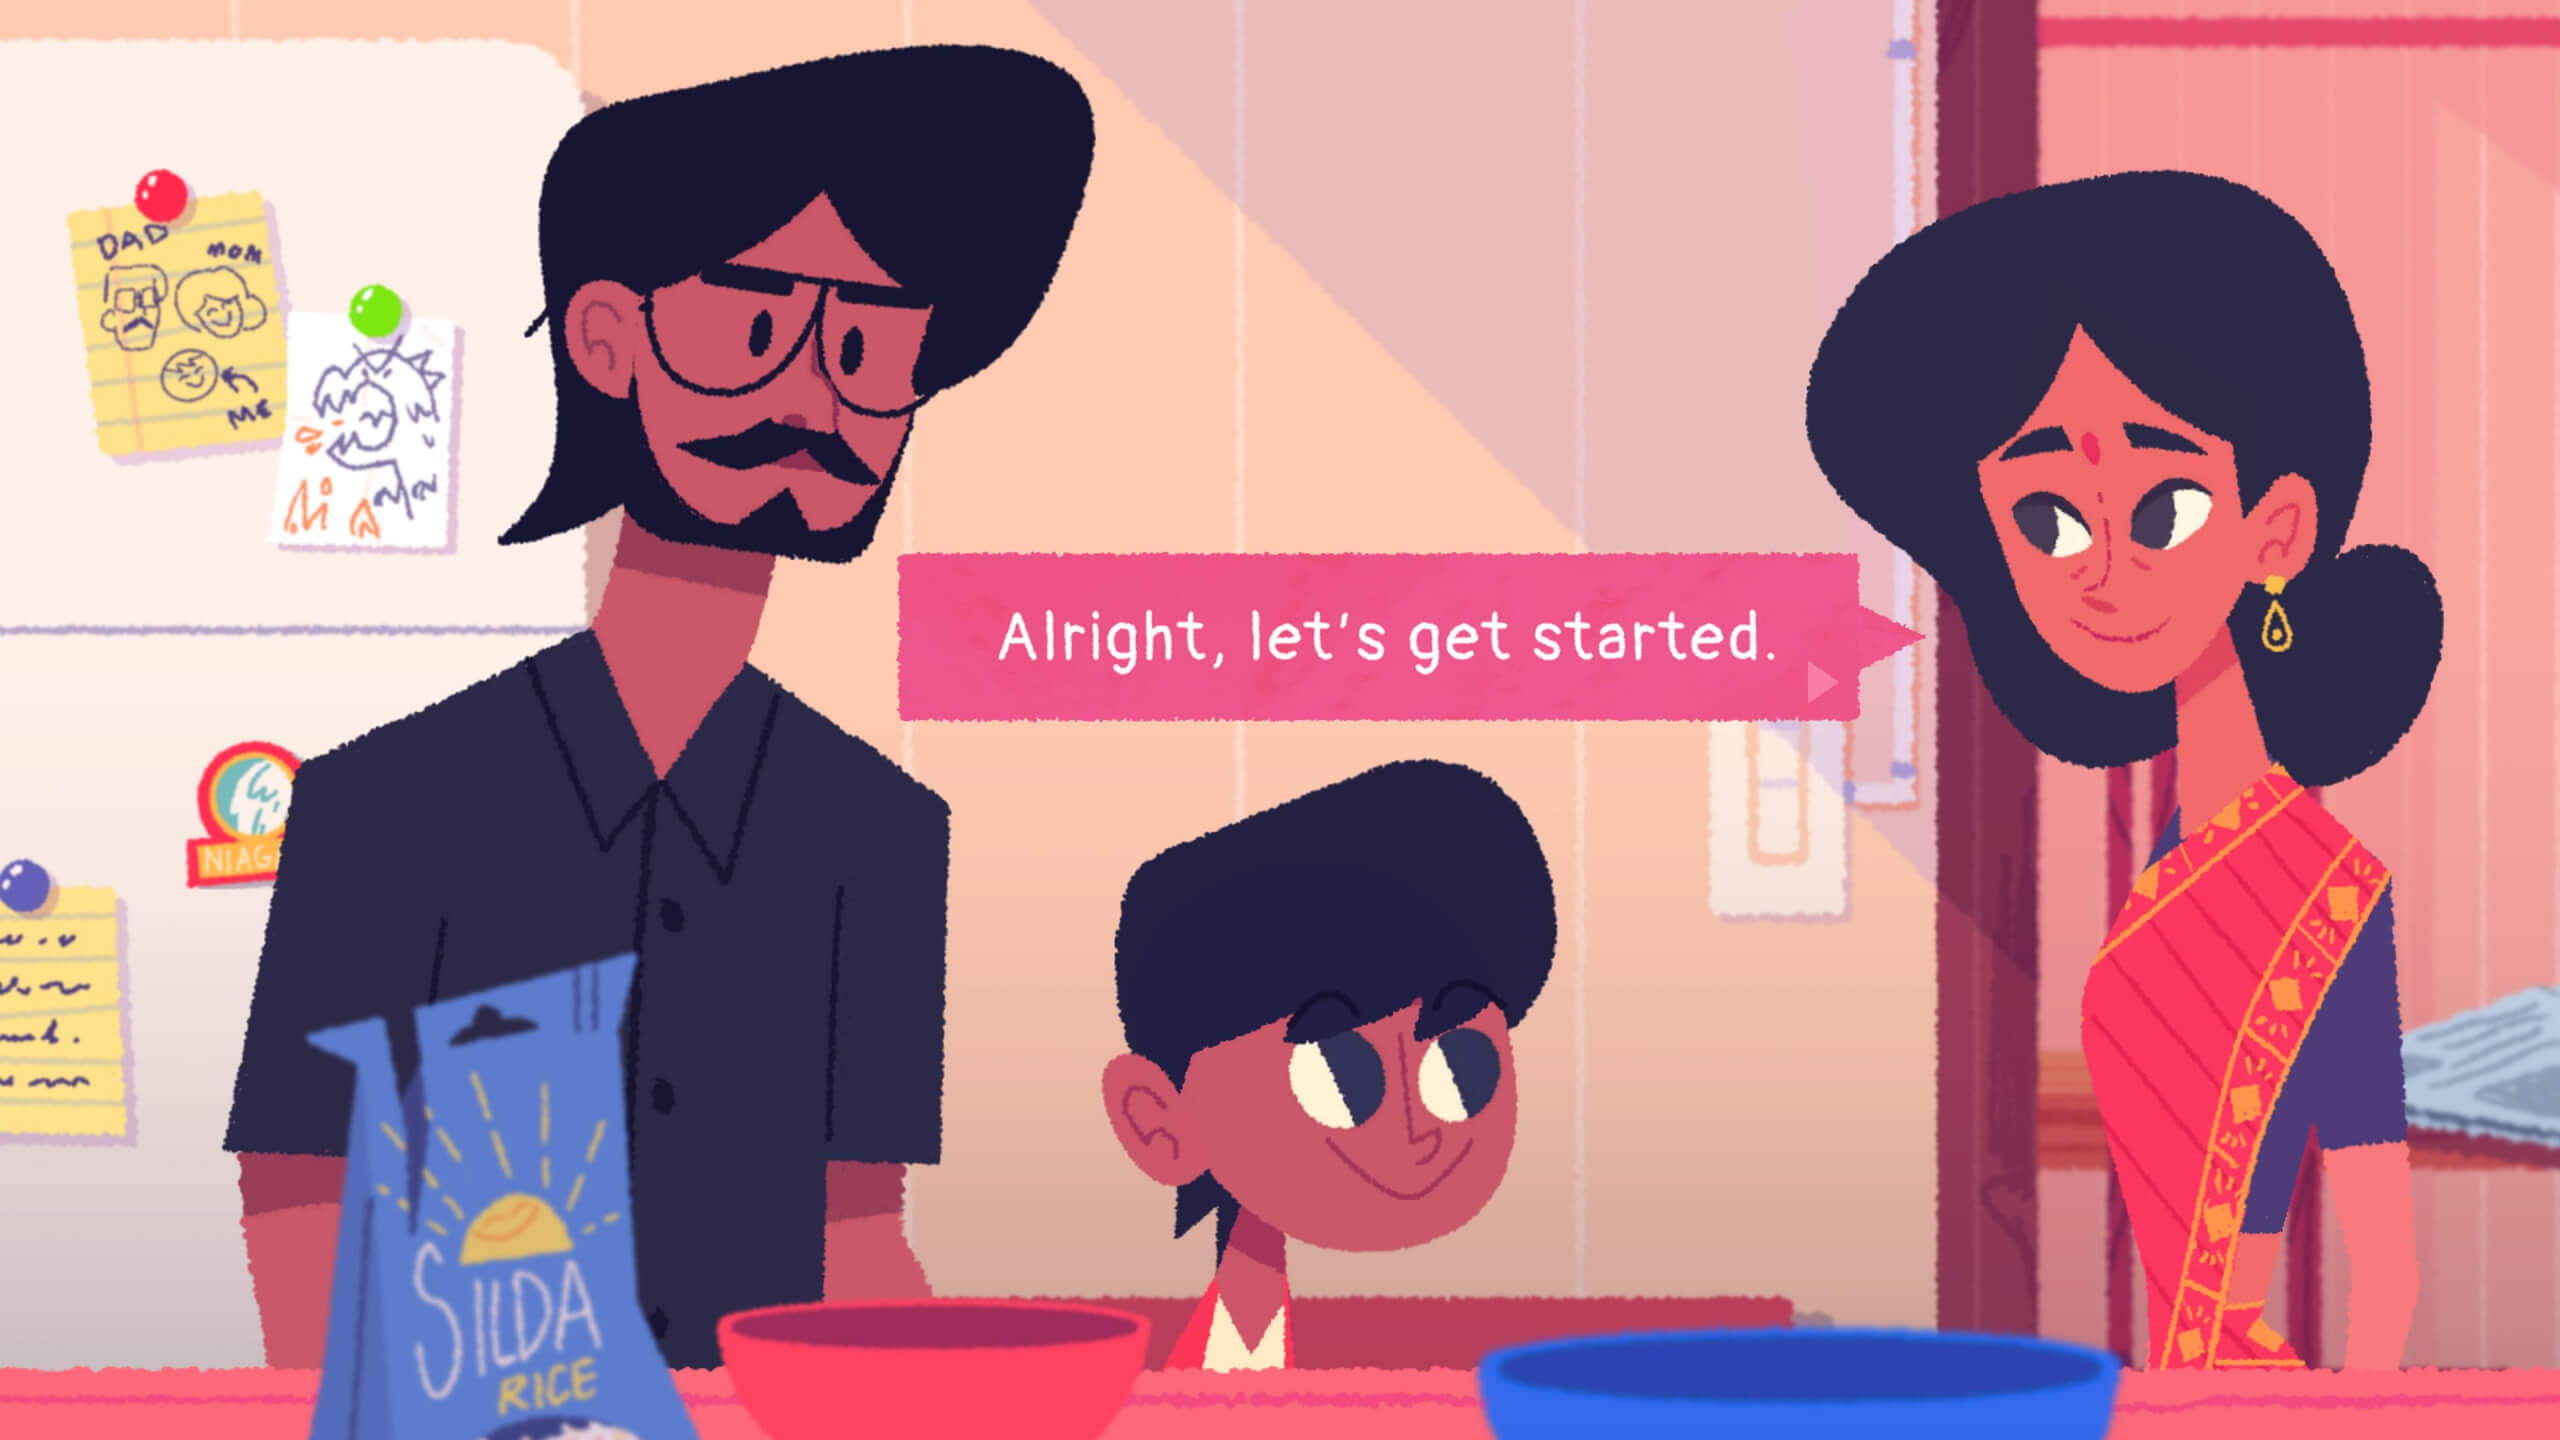 Venba, Paavalan and Kavin stood together in the kitchen about to start cooking. A speech bubble indicates Venba saying "Alright, let's get started".